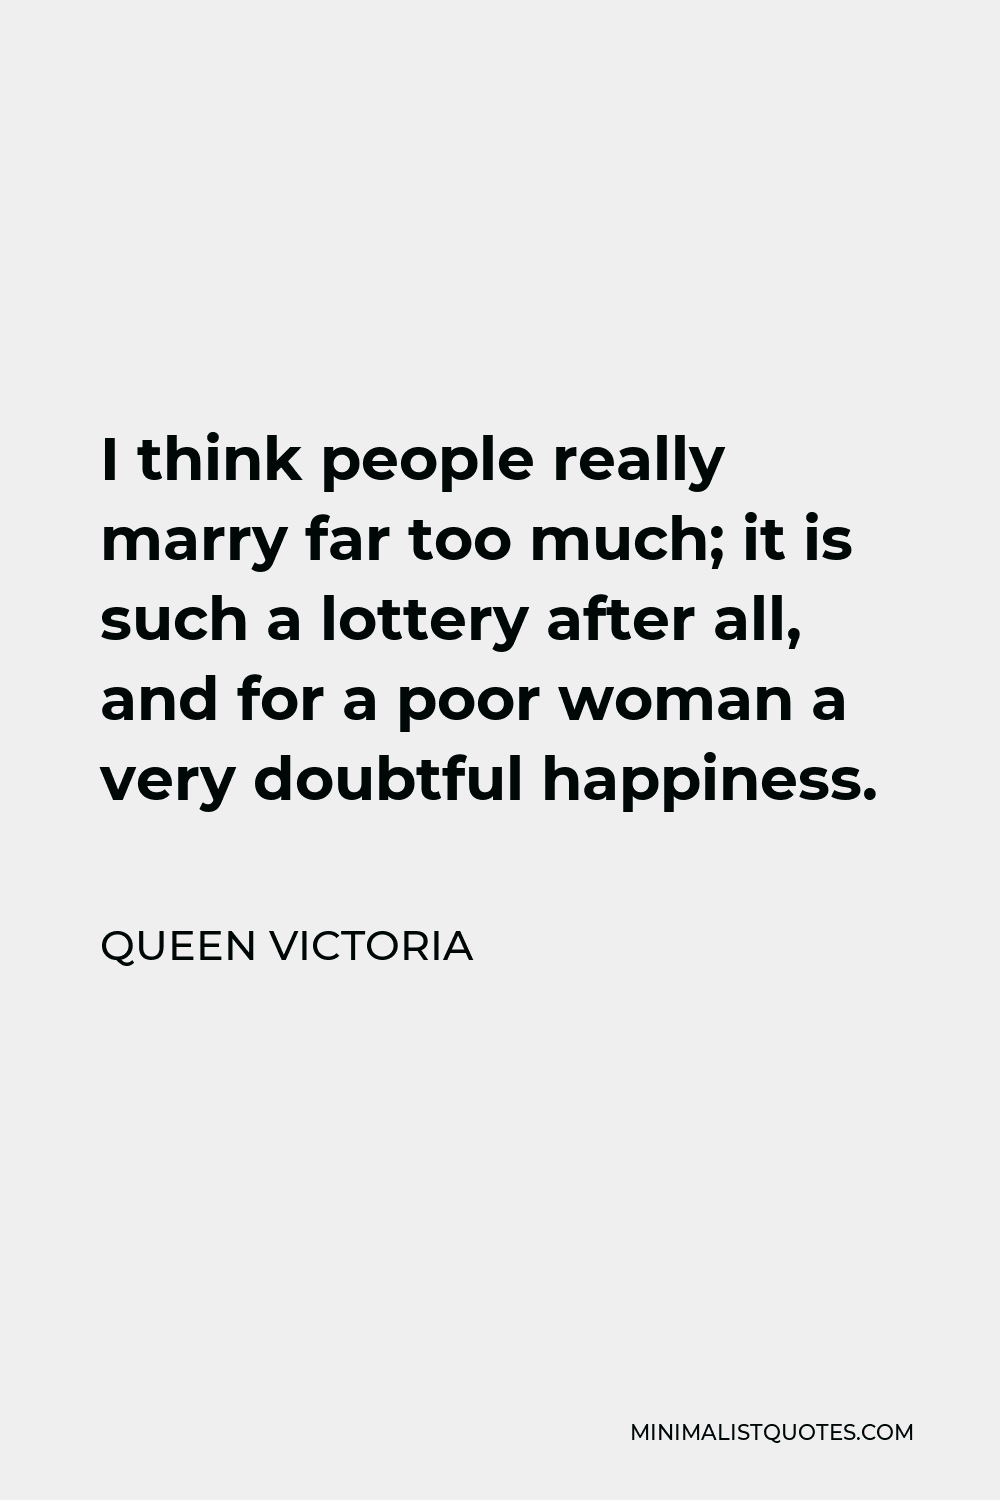 Queen Victoria Quote - I think people really marry far too much; it is such a lottery after all, and for a poor woman a very doubtful happiness.